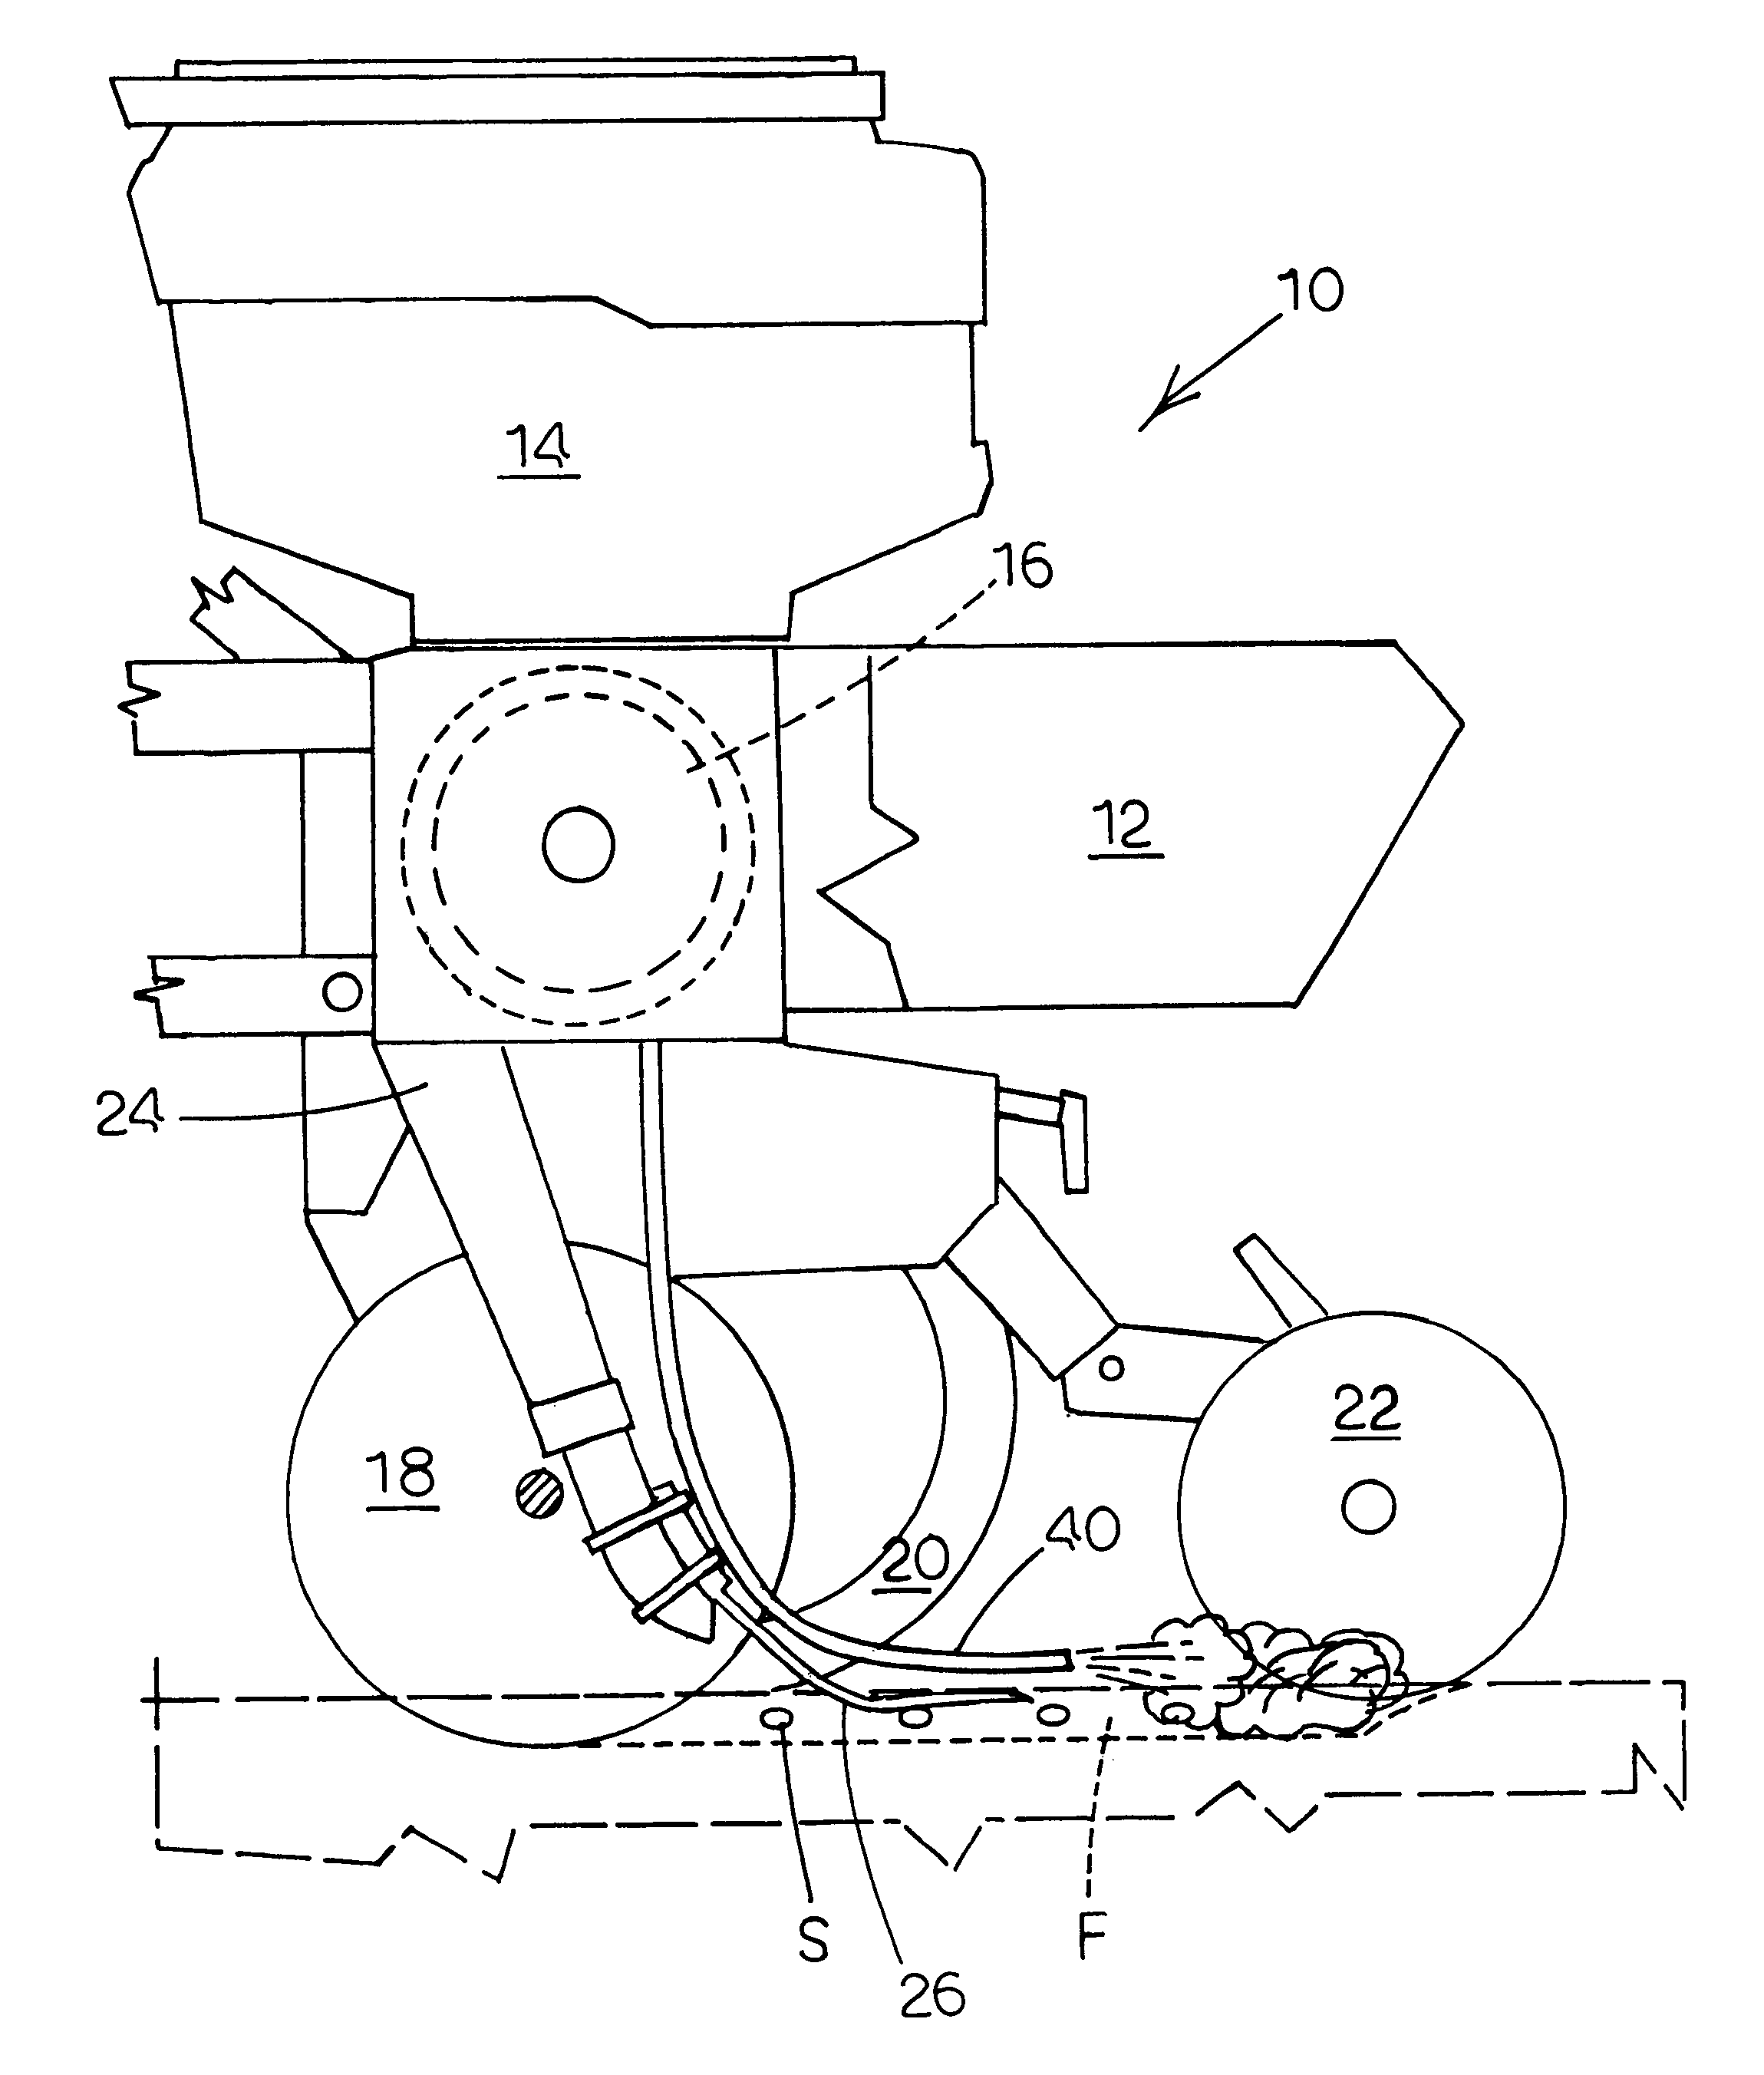 Planting apparatus with improved liquid pesticide delivery device and related method for delivering liquid pesticide